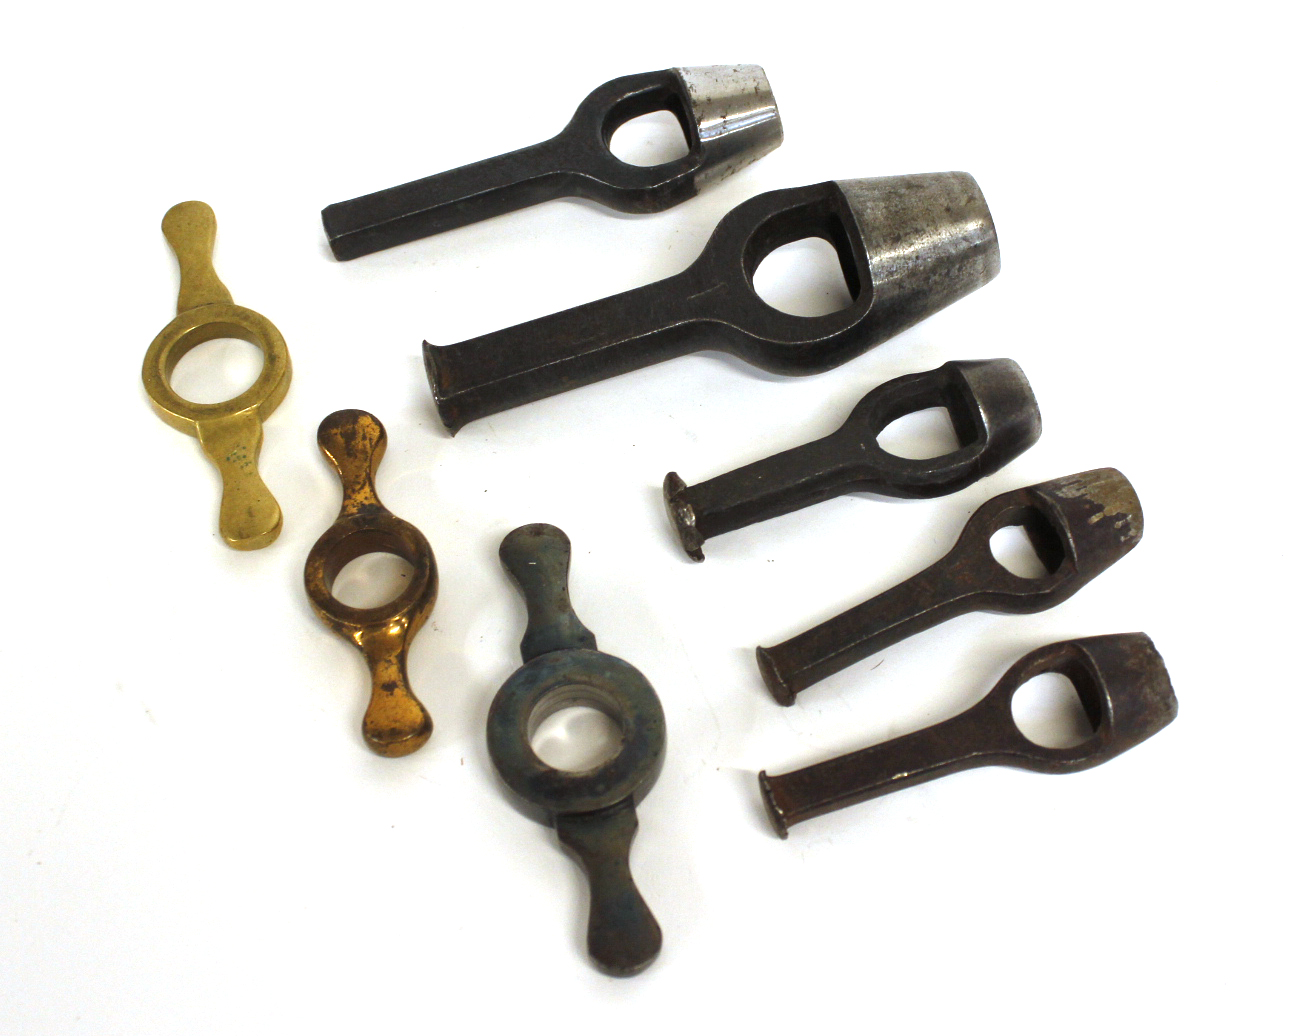 Five steel wad punches in 4; 12 and 16 bore; three brass, etc. resizers in 8 and 12 bore.